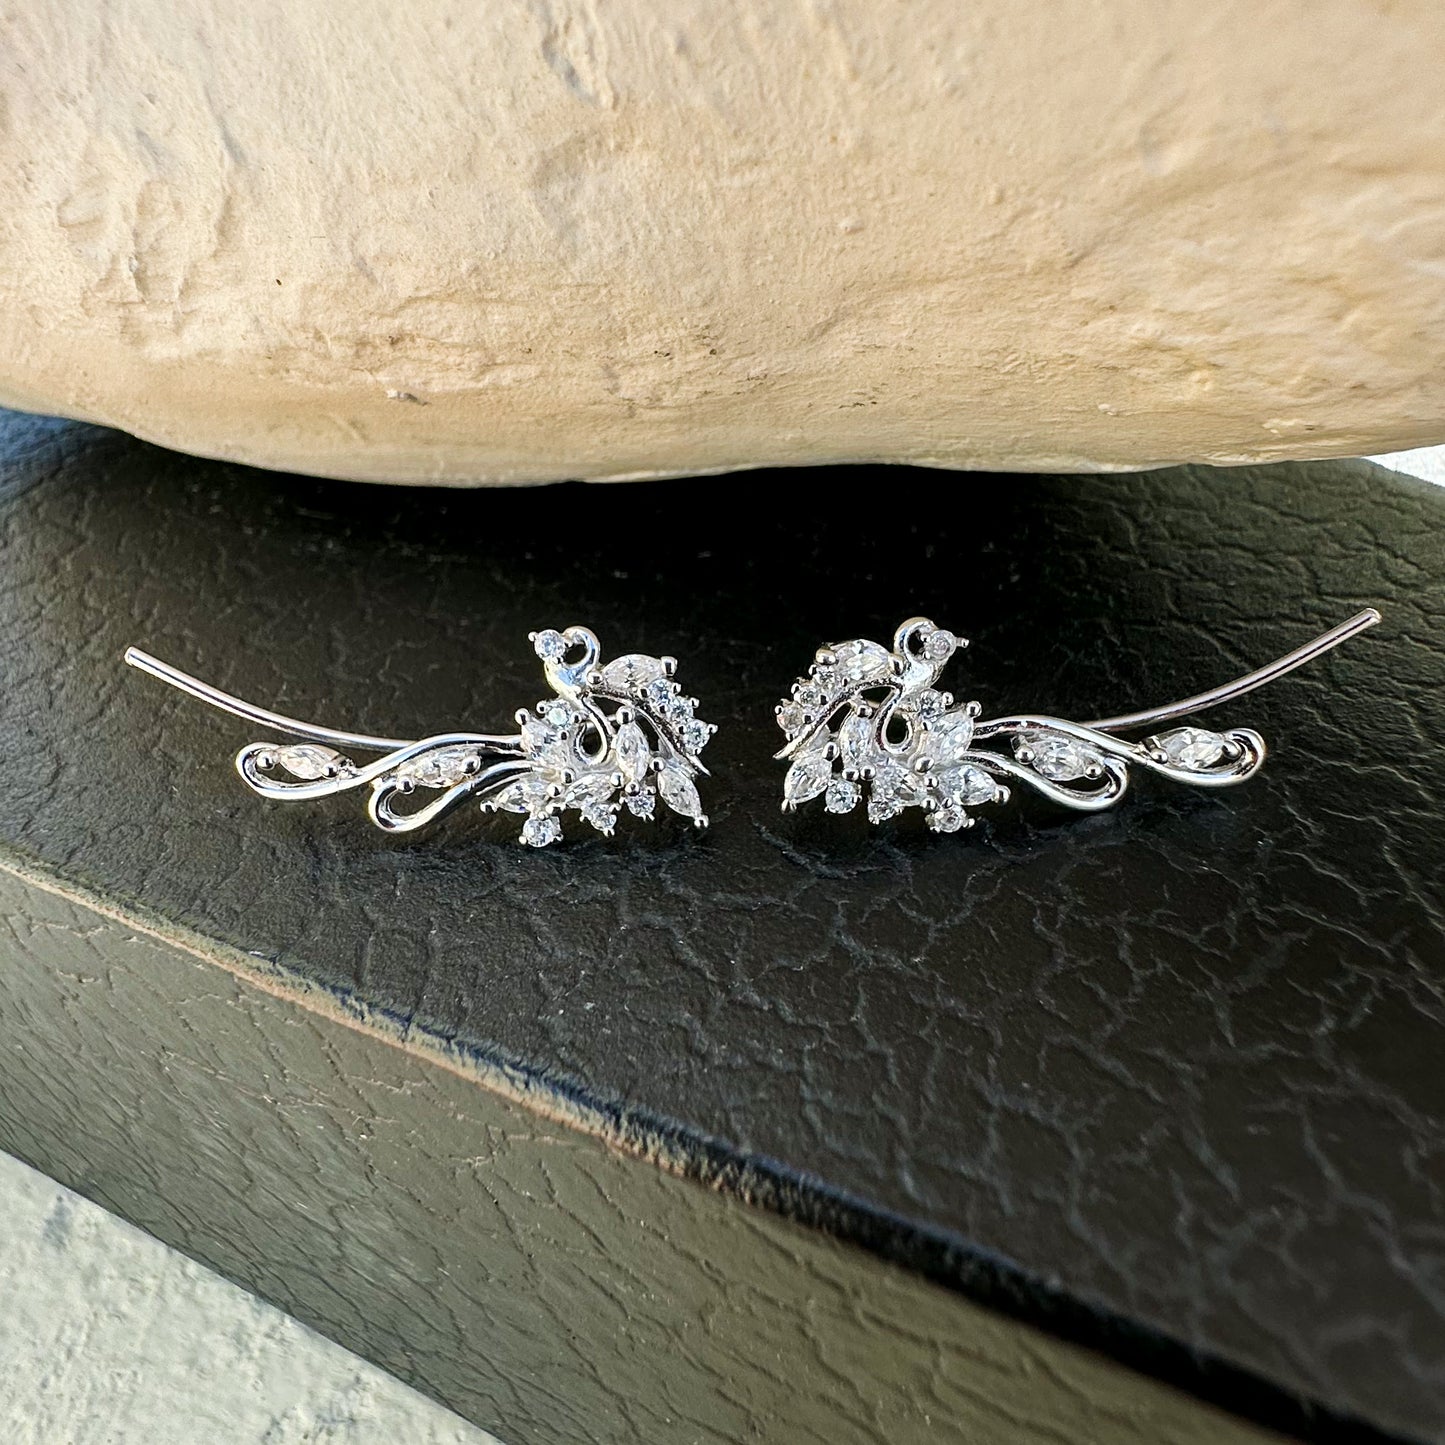 Lotus ear climbers with CZ diamonds - Sterling Silver 925